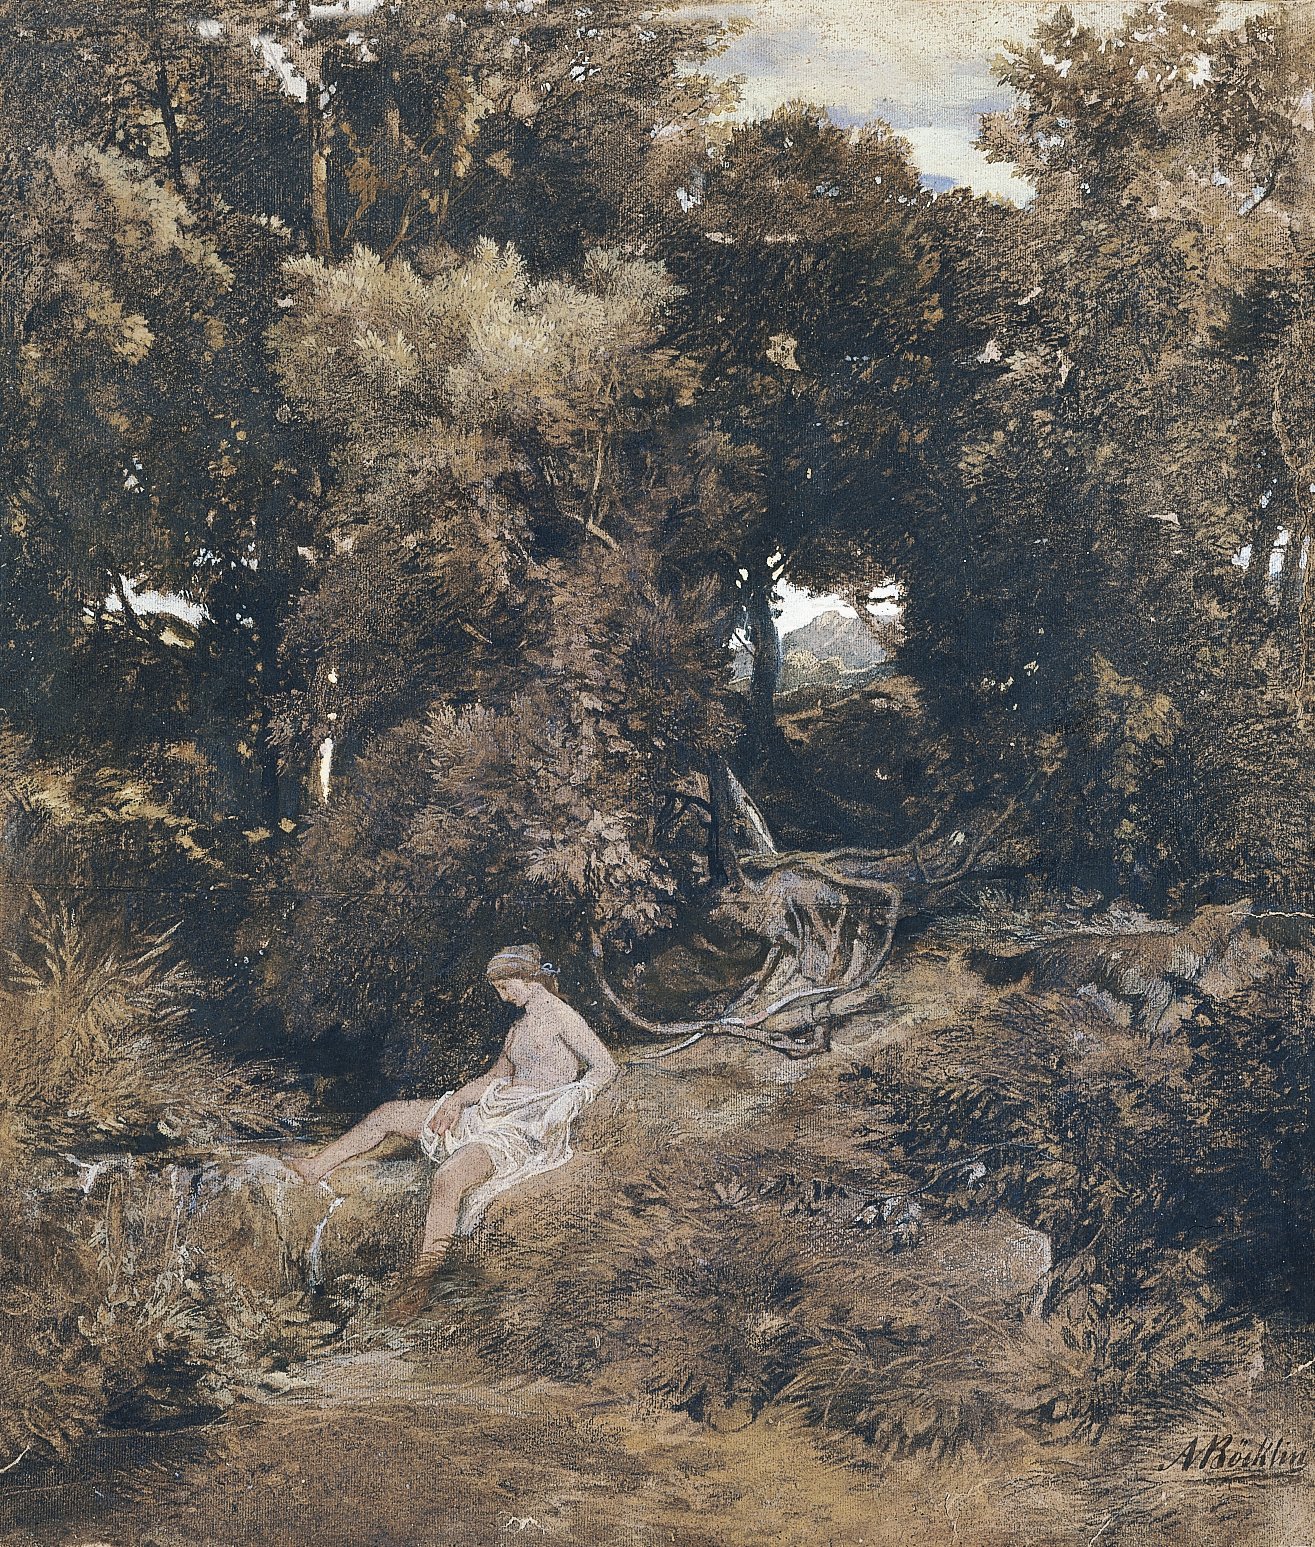 A Nymph at the Fountain (verso: Pan chasing a Nymph).  Arnold Böcklin